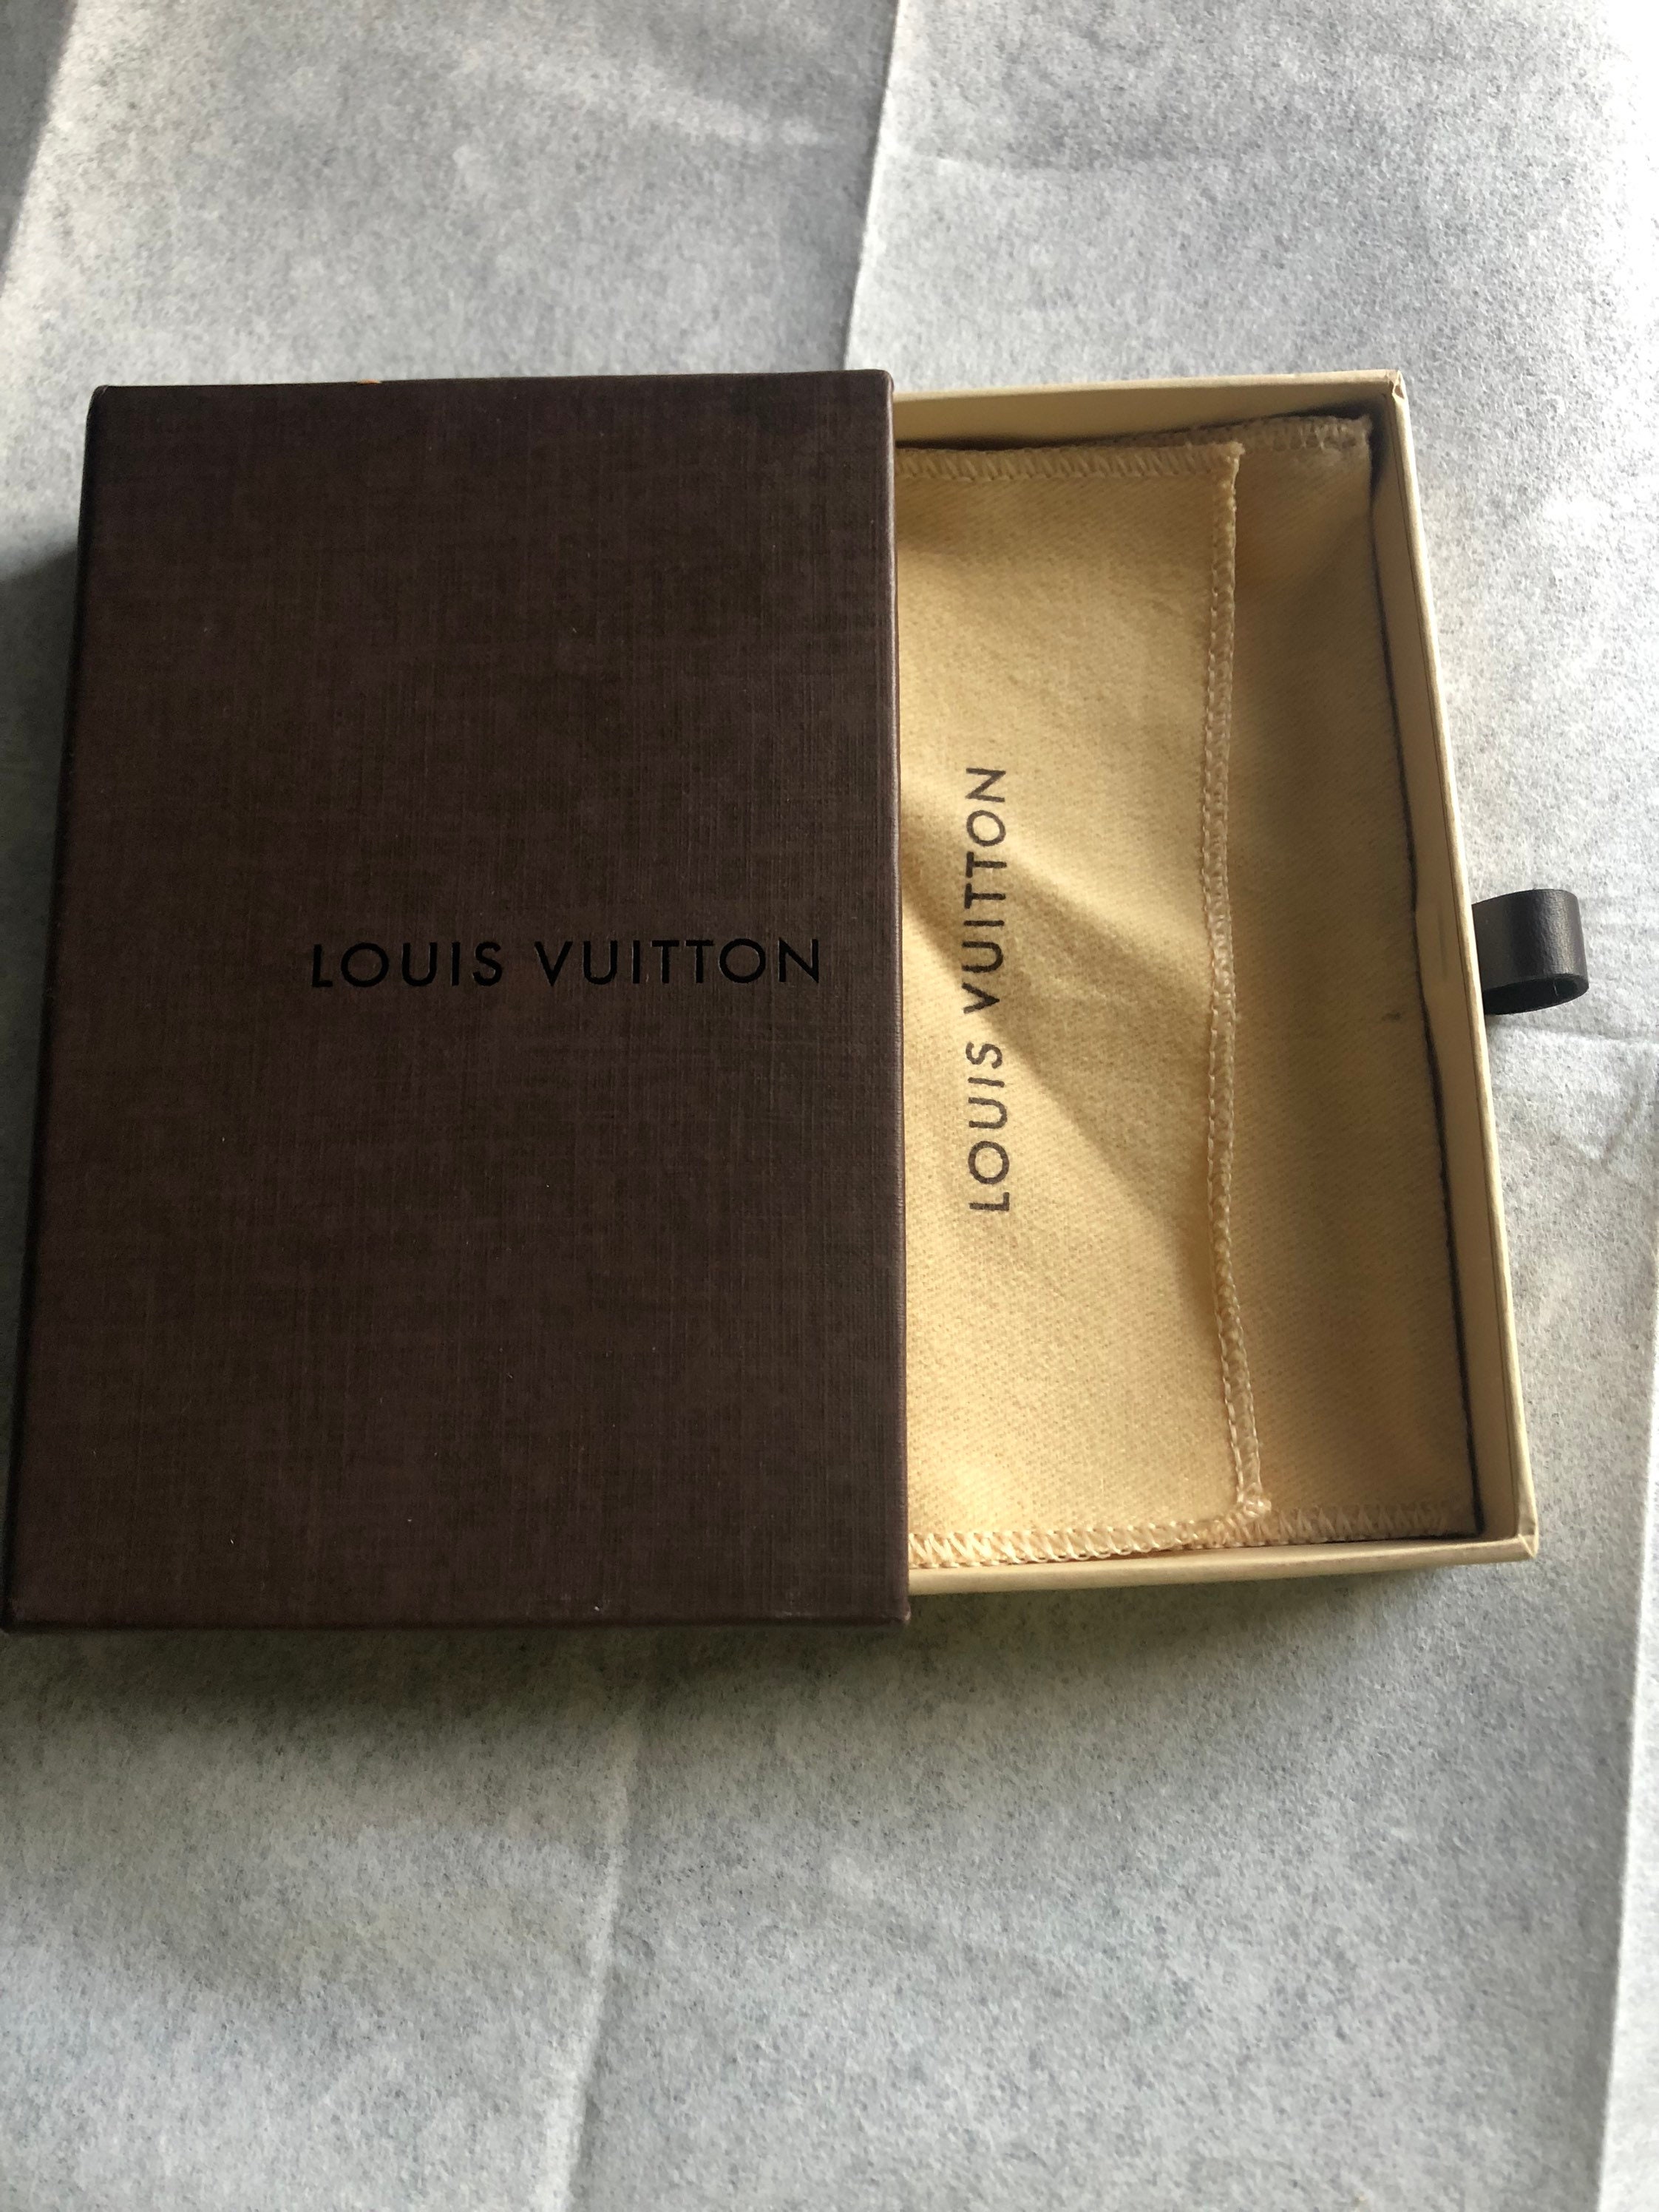 Exclusive stuff or overstock LV? : r/Louisvuitton